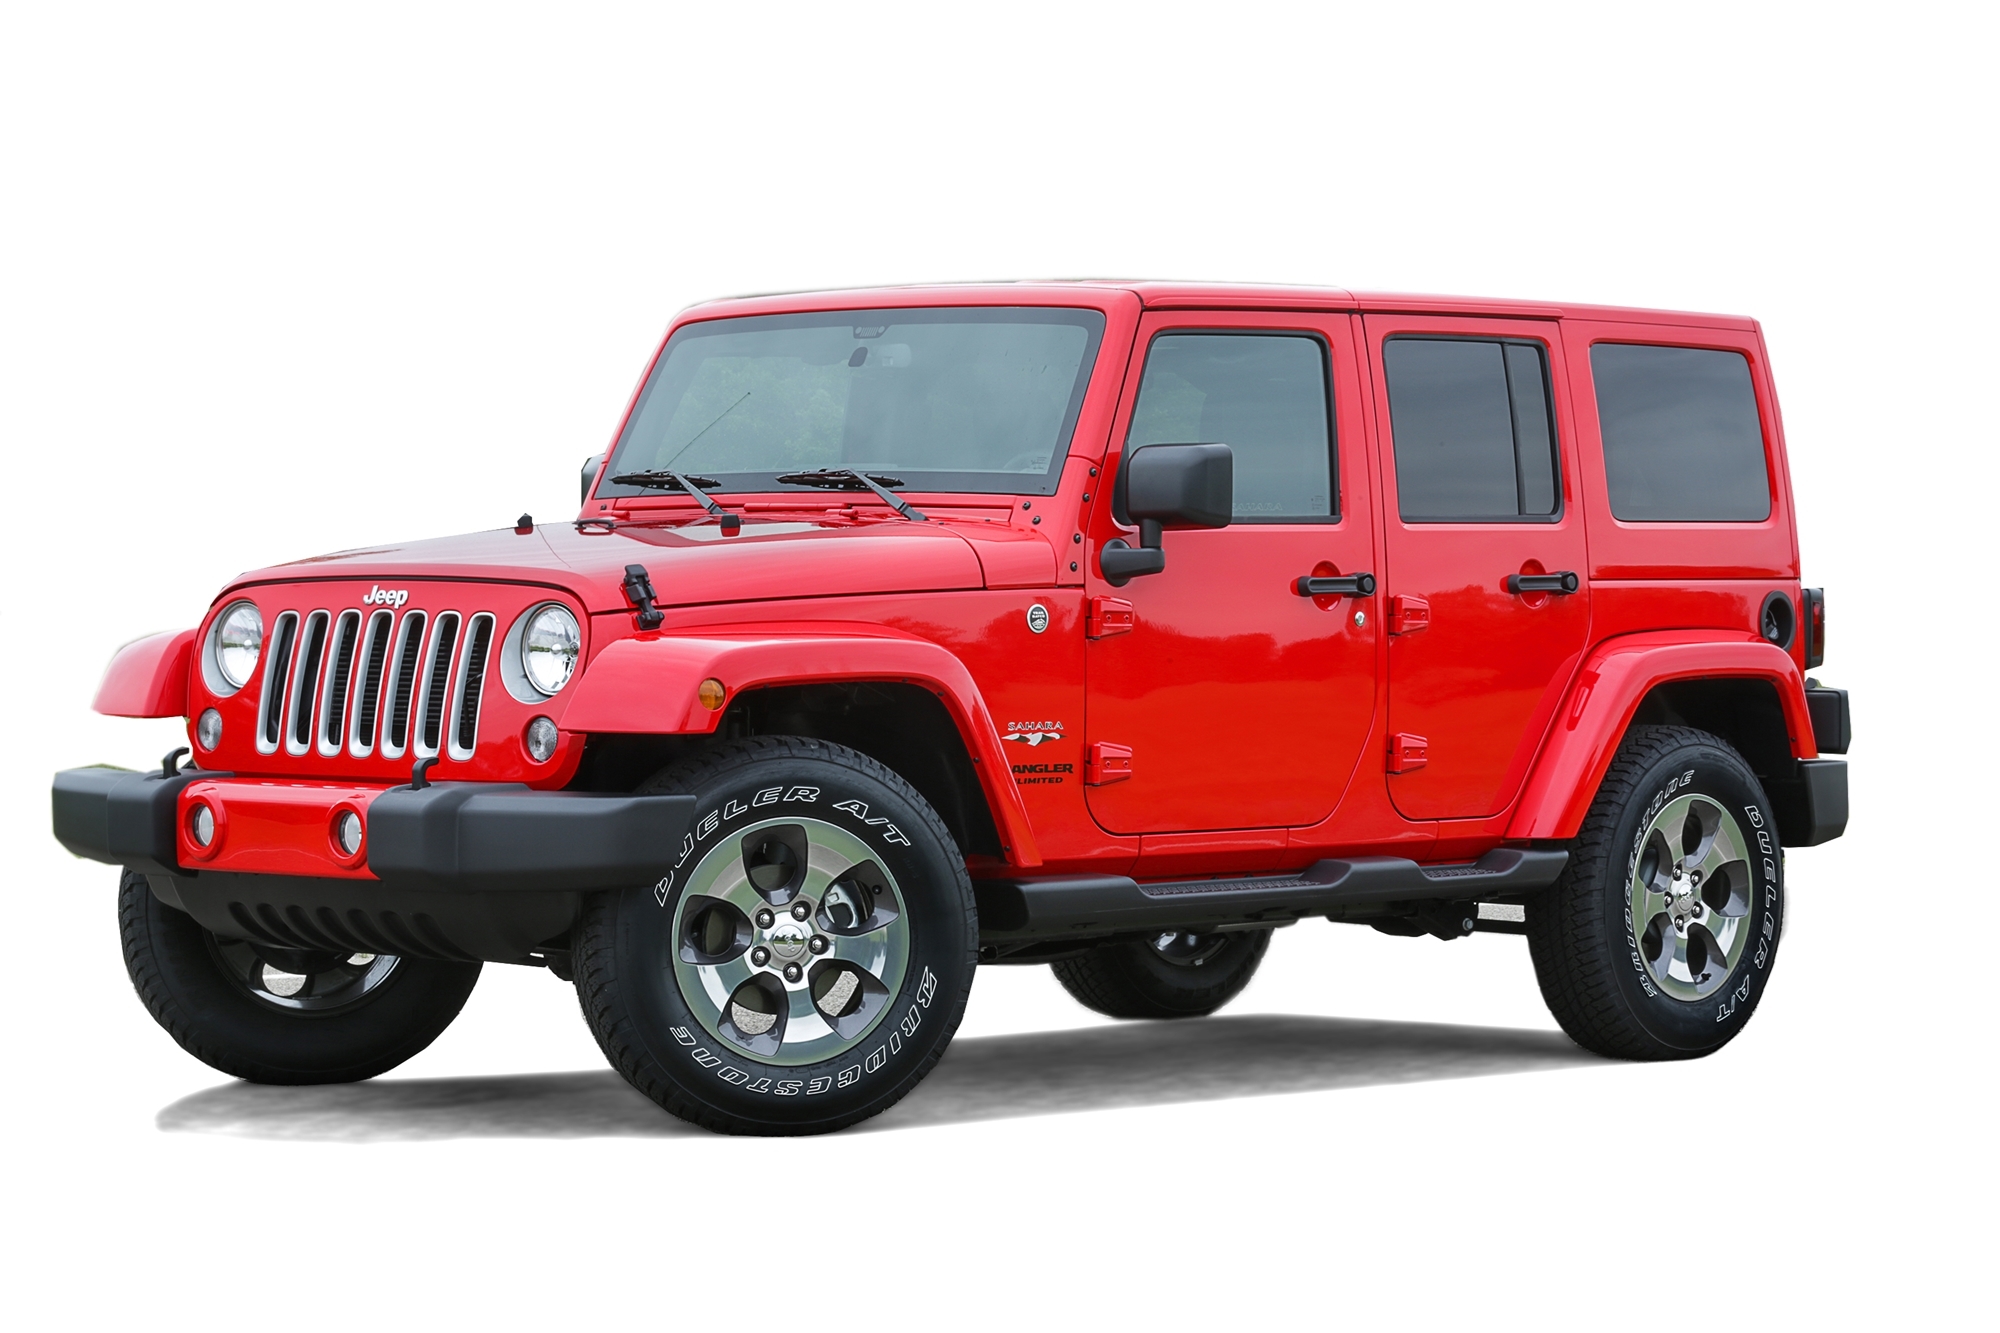 2017 Jeep Wrangler Unlimited Big Bear Full Specs, Features and Price |  CarBuzz